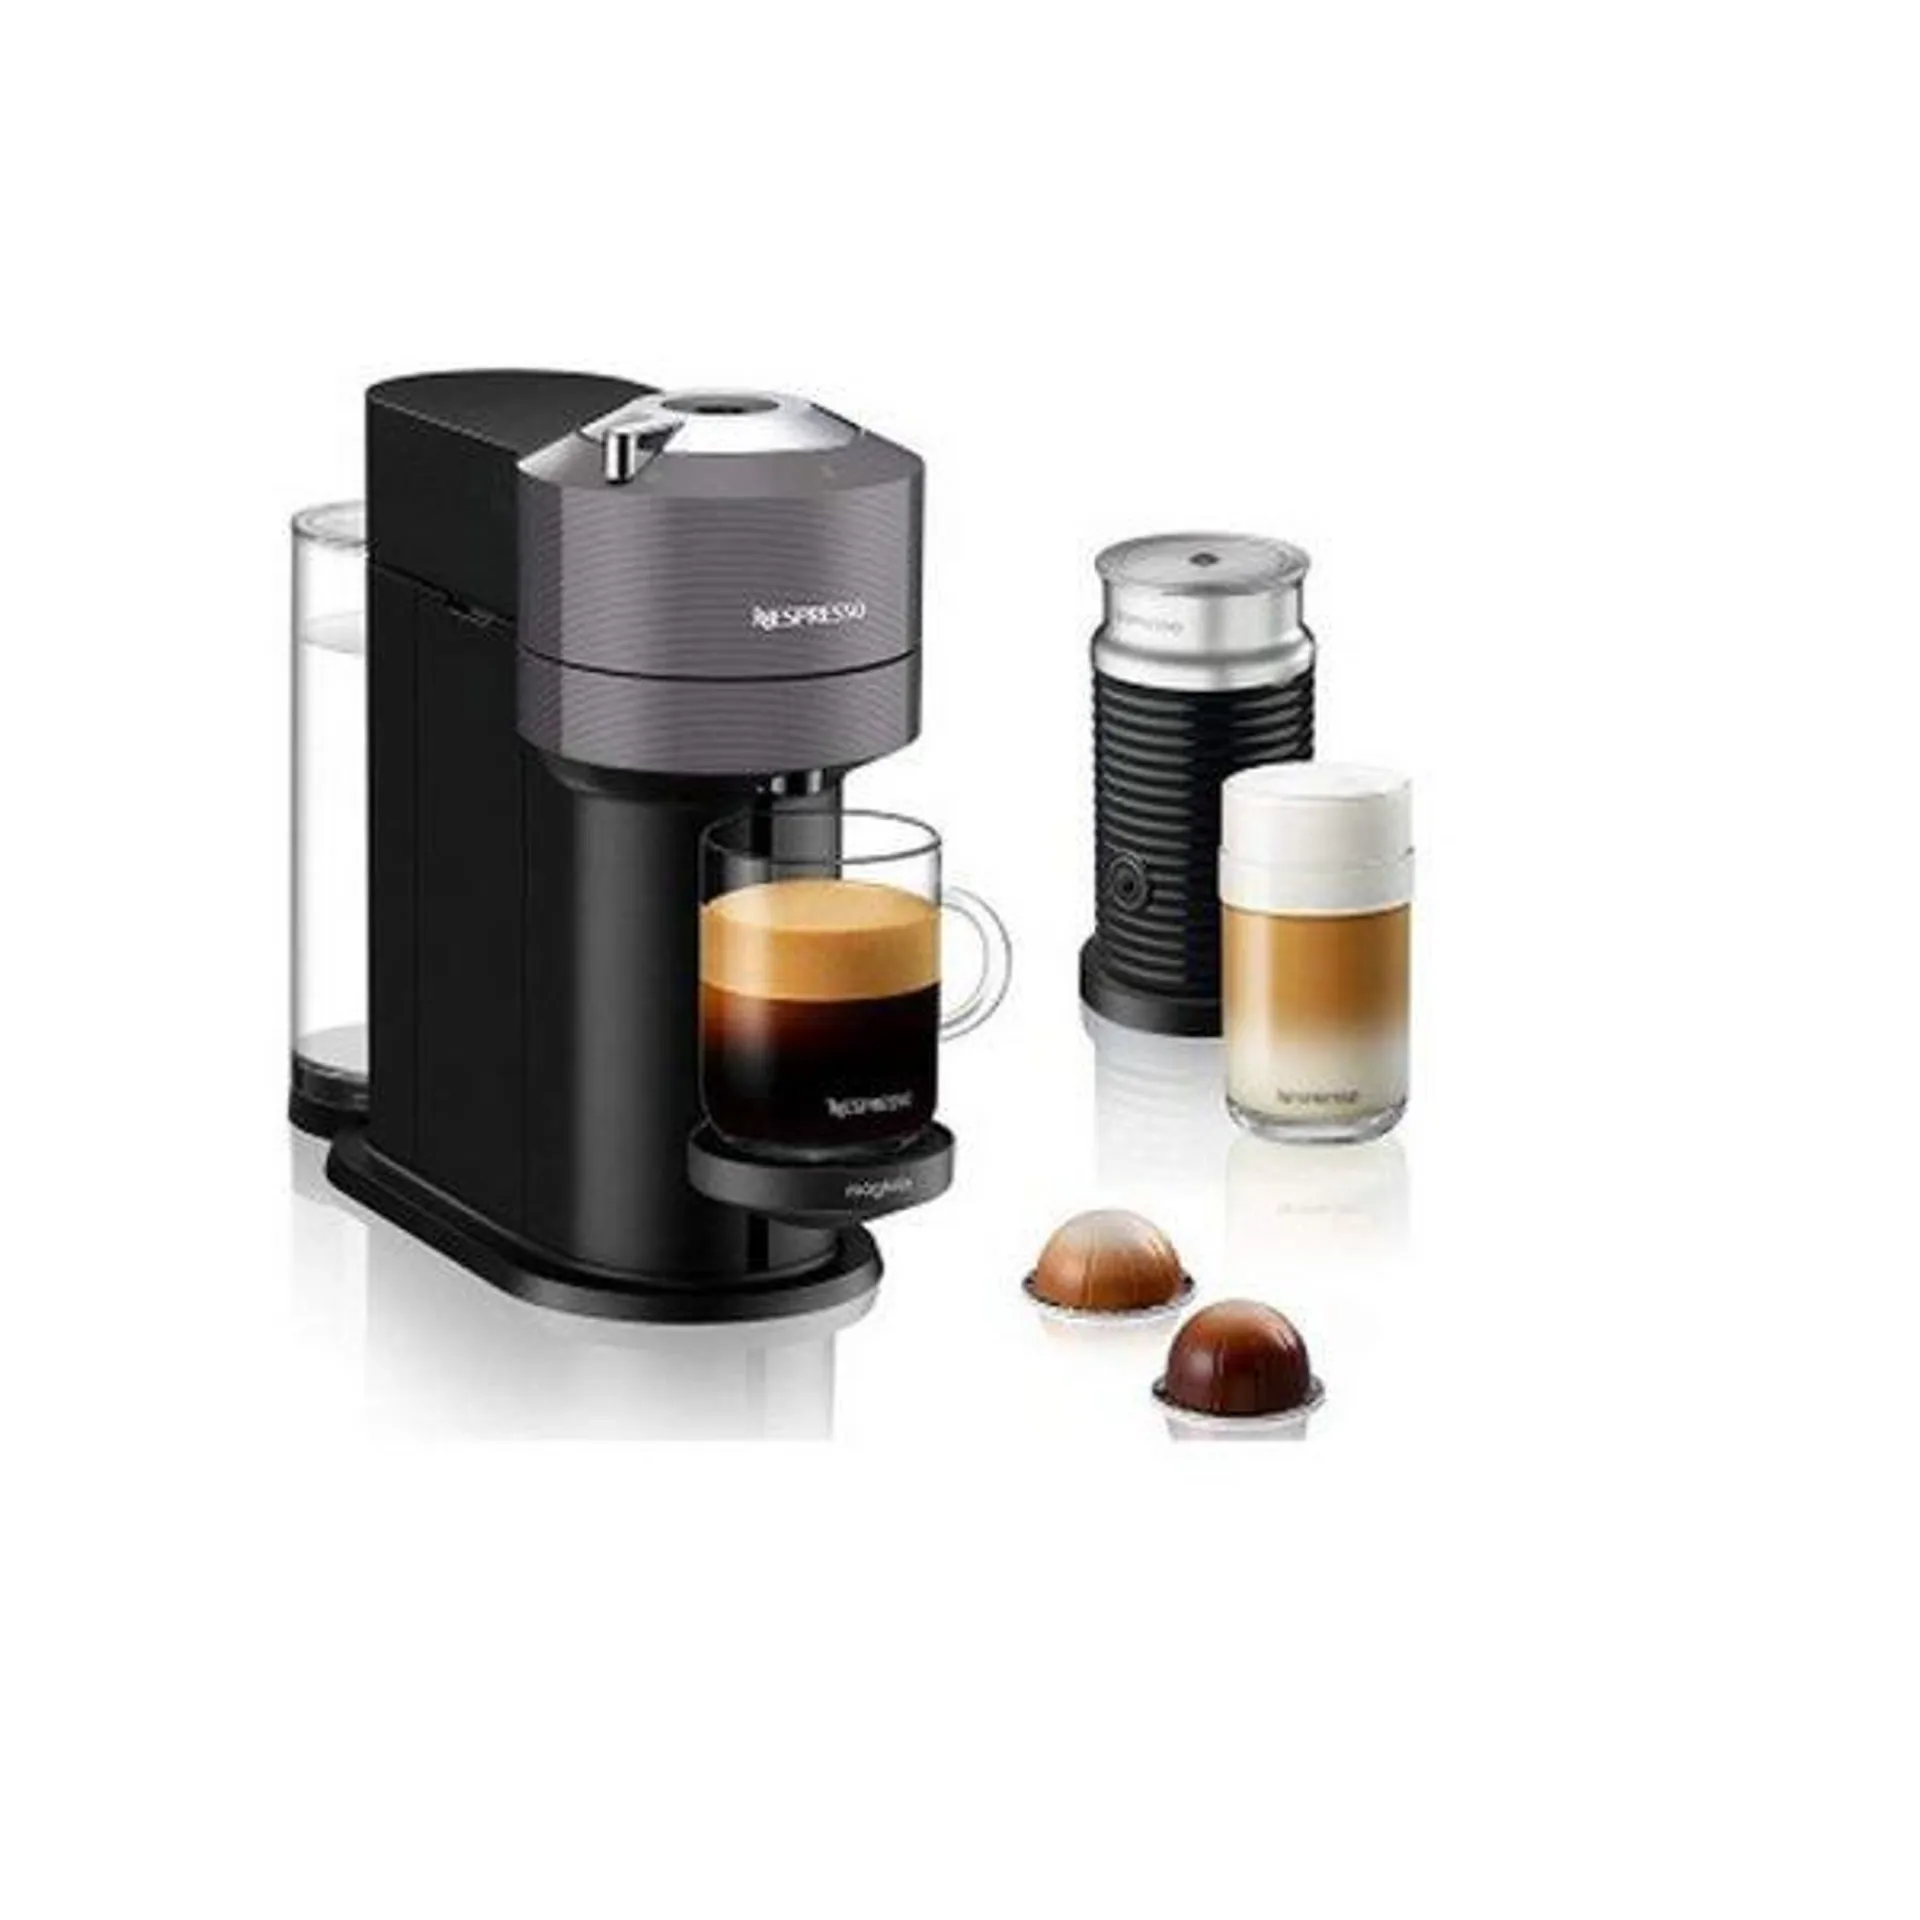 Nespresso Vertuo Next Coffee Machine with Milk Frother by Magimix